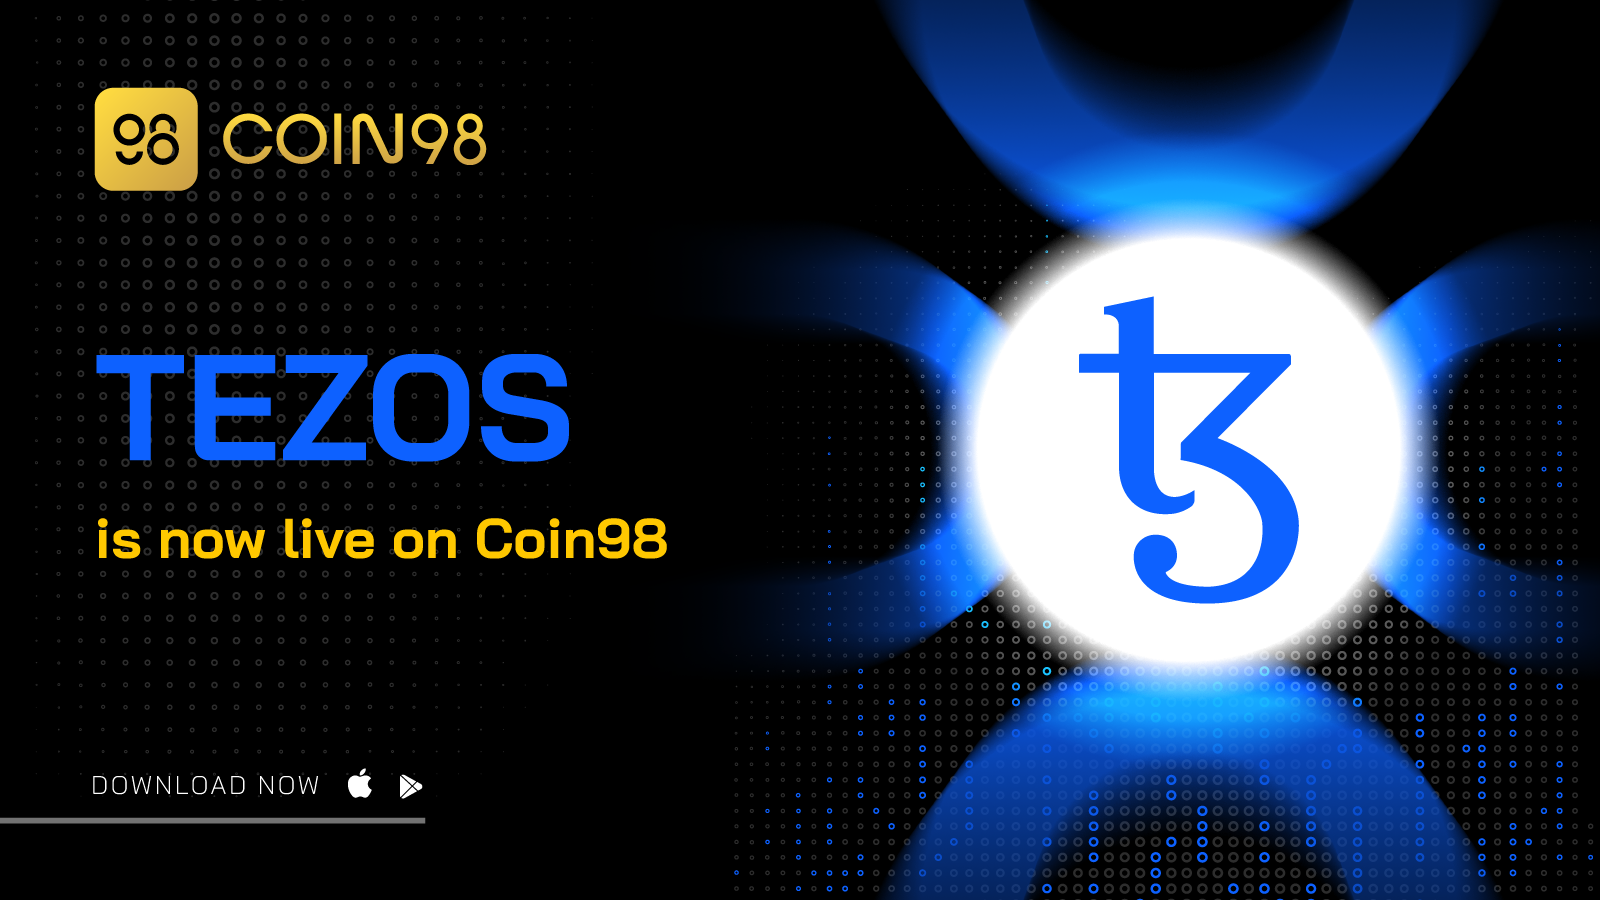 Coin98 broadens its universe with the integration of Tezos - a blockchain designed to evolve